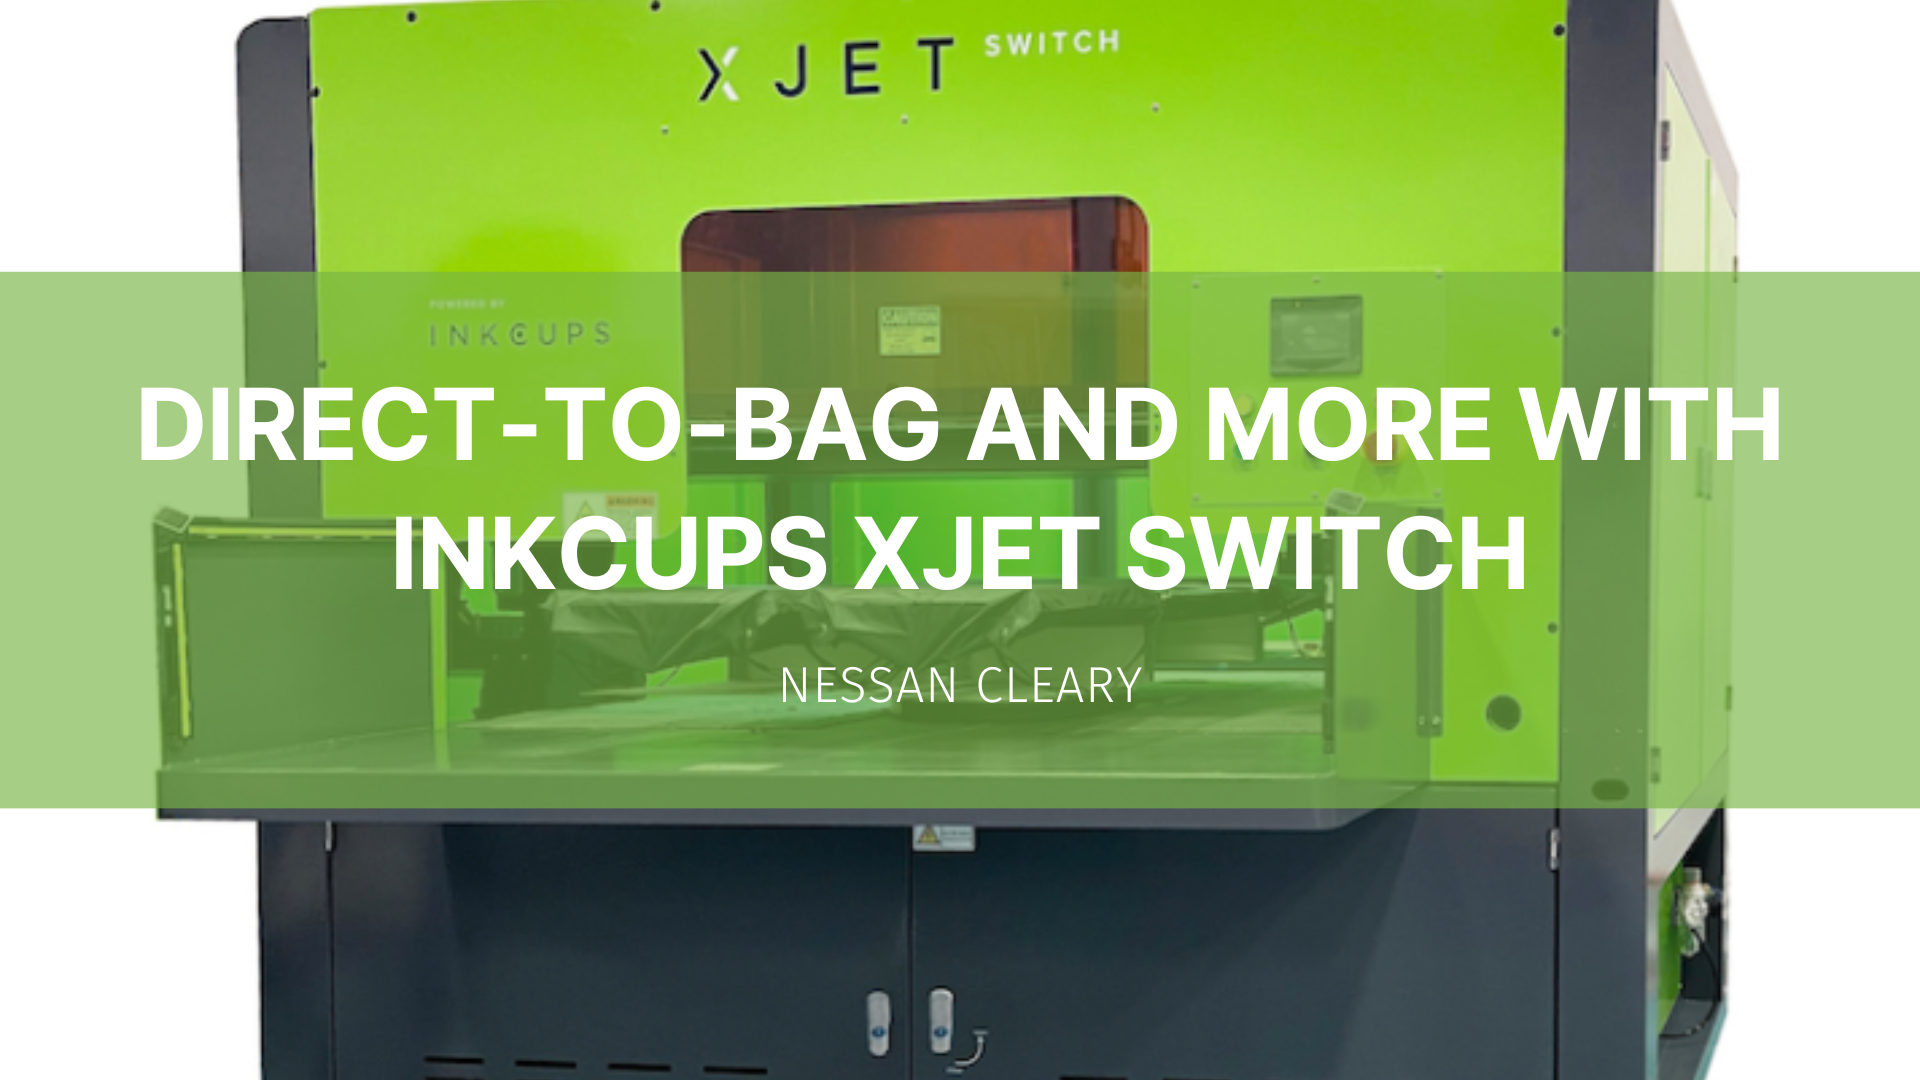 Featured image for “Direct-to-bag and more with Inkcups XJet Switch”